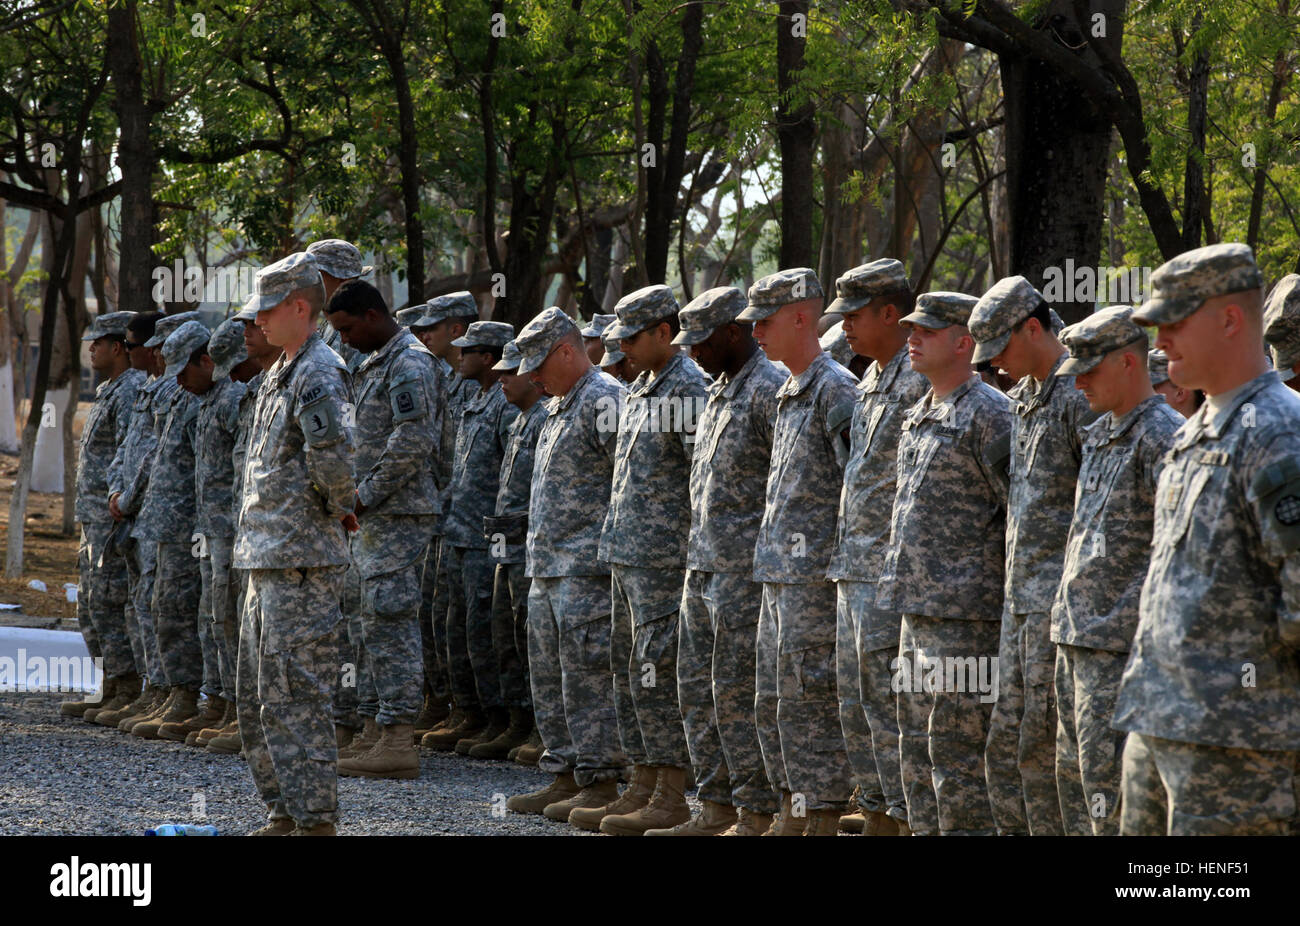 U.S Military personnel assigned to Task Force Oso, bow their head in remembrance to their fallen comrade Spc. Hernaldo Beltran, who passed away during Beyond the Horizon in Zacapa Guatemala, April 25, 2014. Beyond the Horizon is an annual exercise that embraces the partnership between the United States and Guatemala, to provide focused humanitarian assistance through various medical, dental and civic action programs. (U.S. Army photo by Sgt. Cameron Boyd/released) Beyond The Horizon 2014, Guatemala 140425-A-TH742-294 Stock Photo